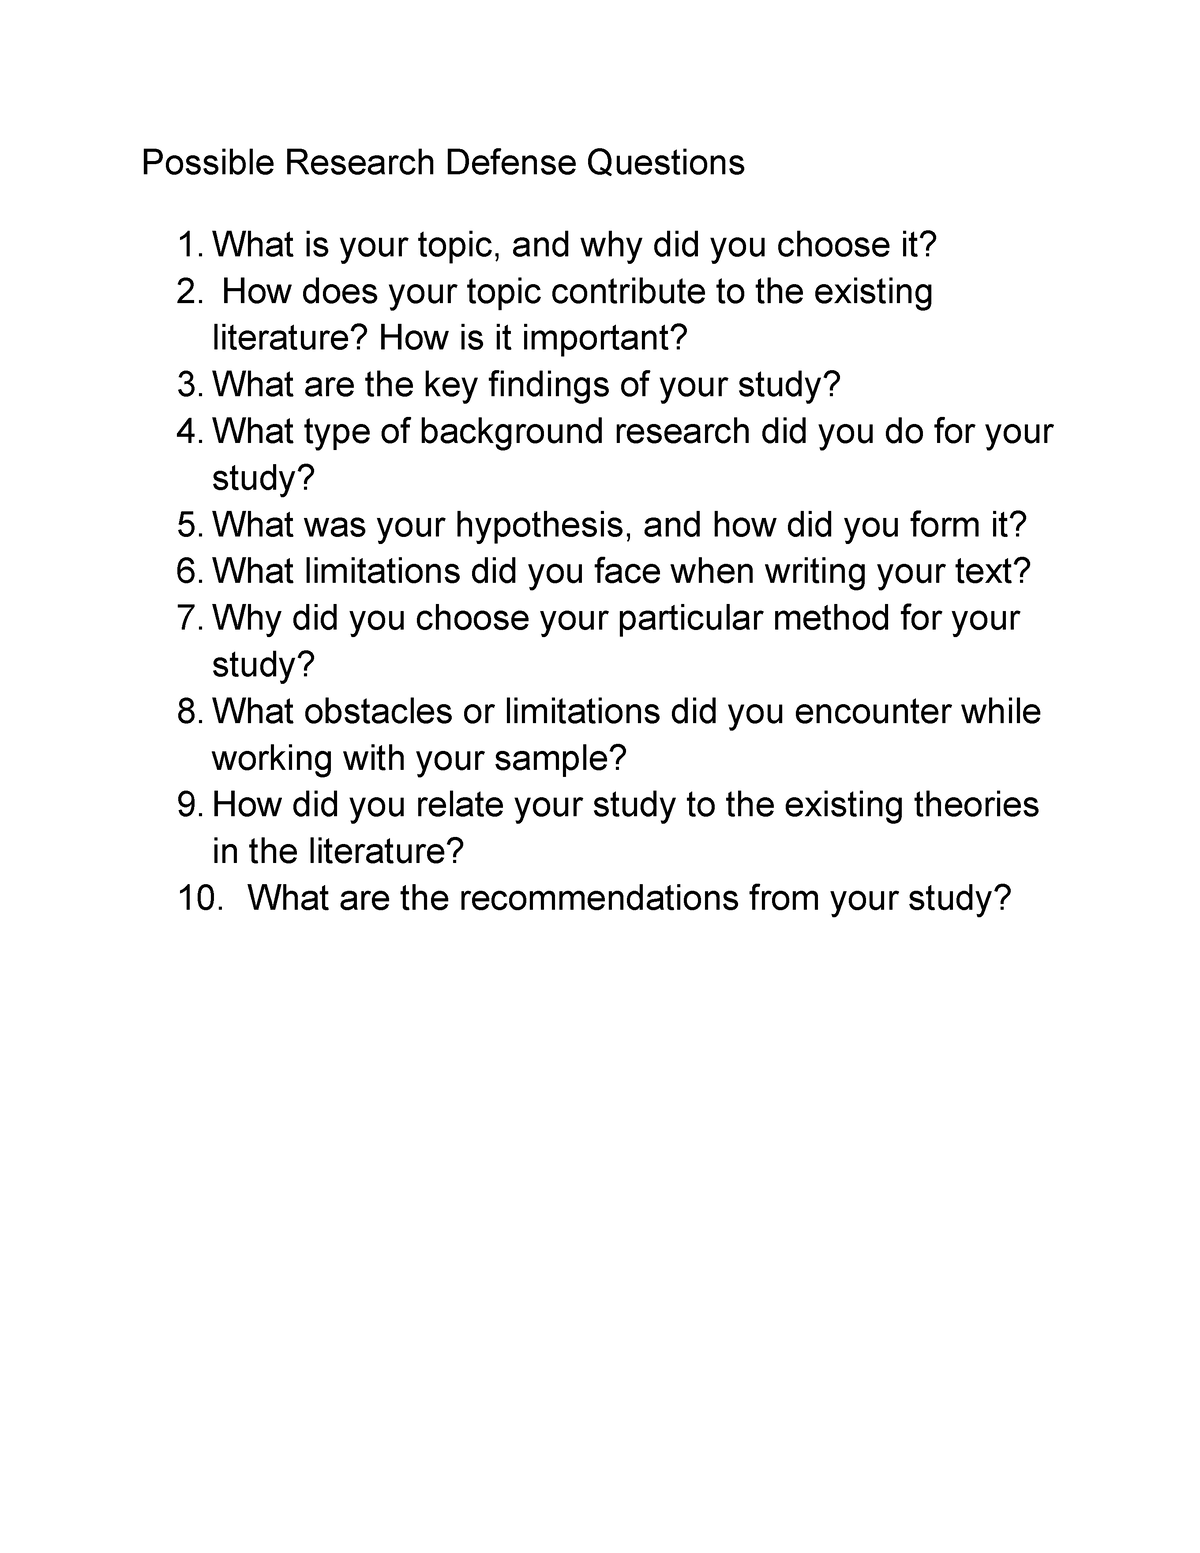 research defense questions and answers pdf